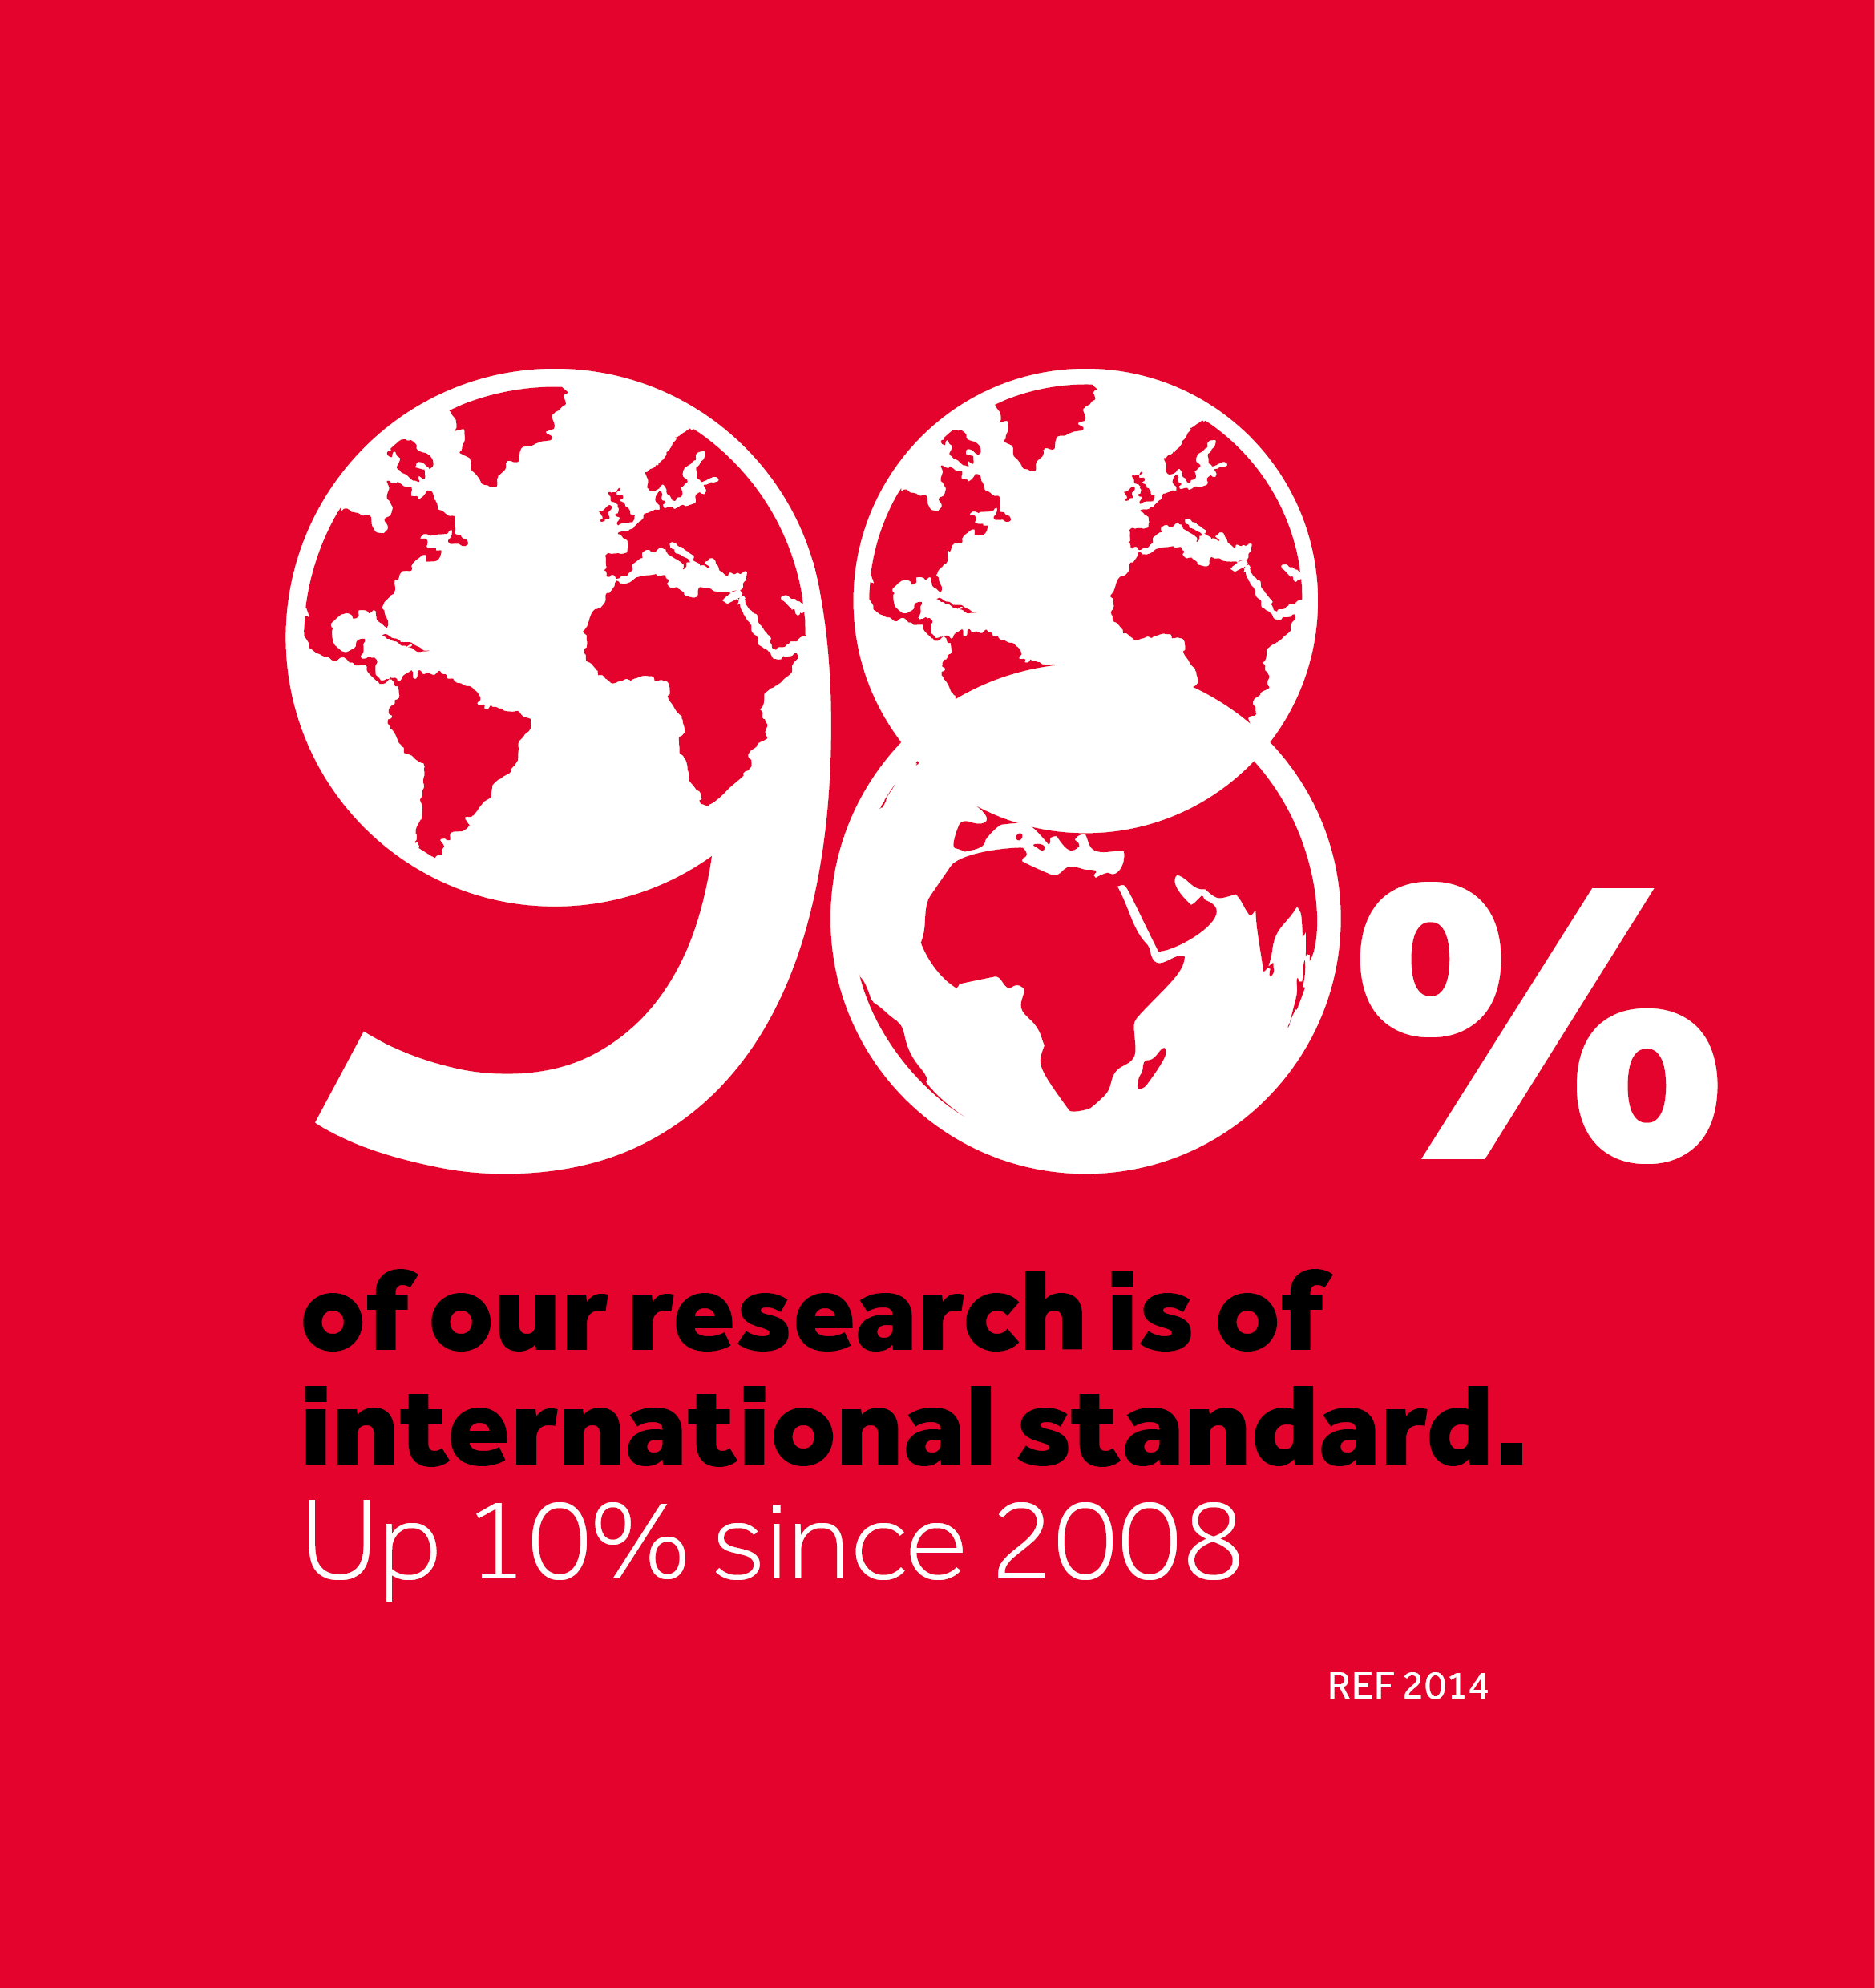 98% of our research is of international standard